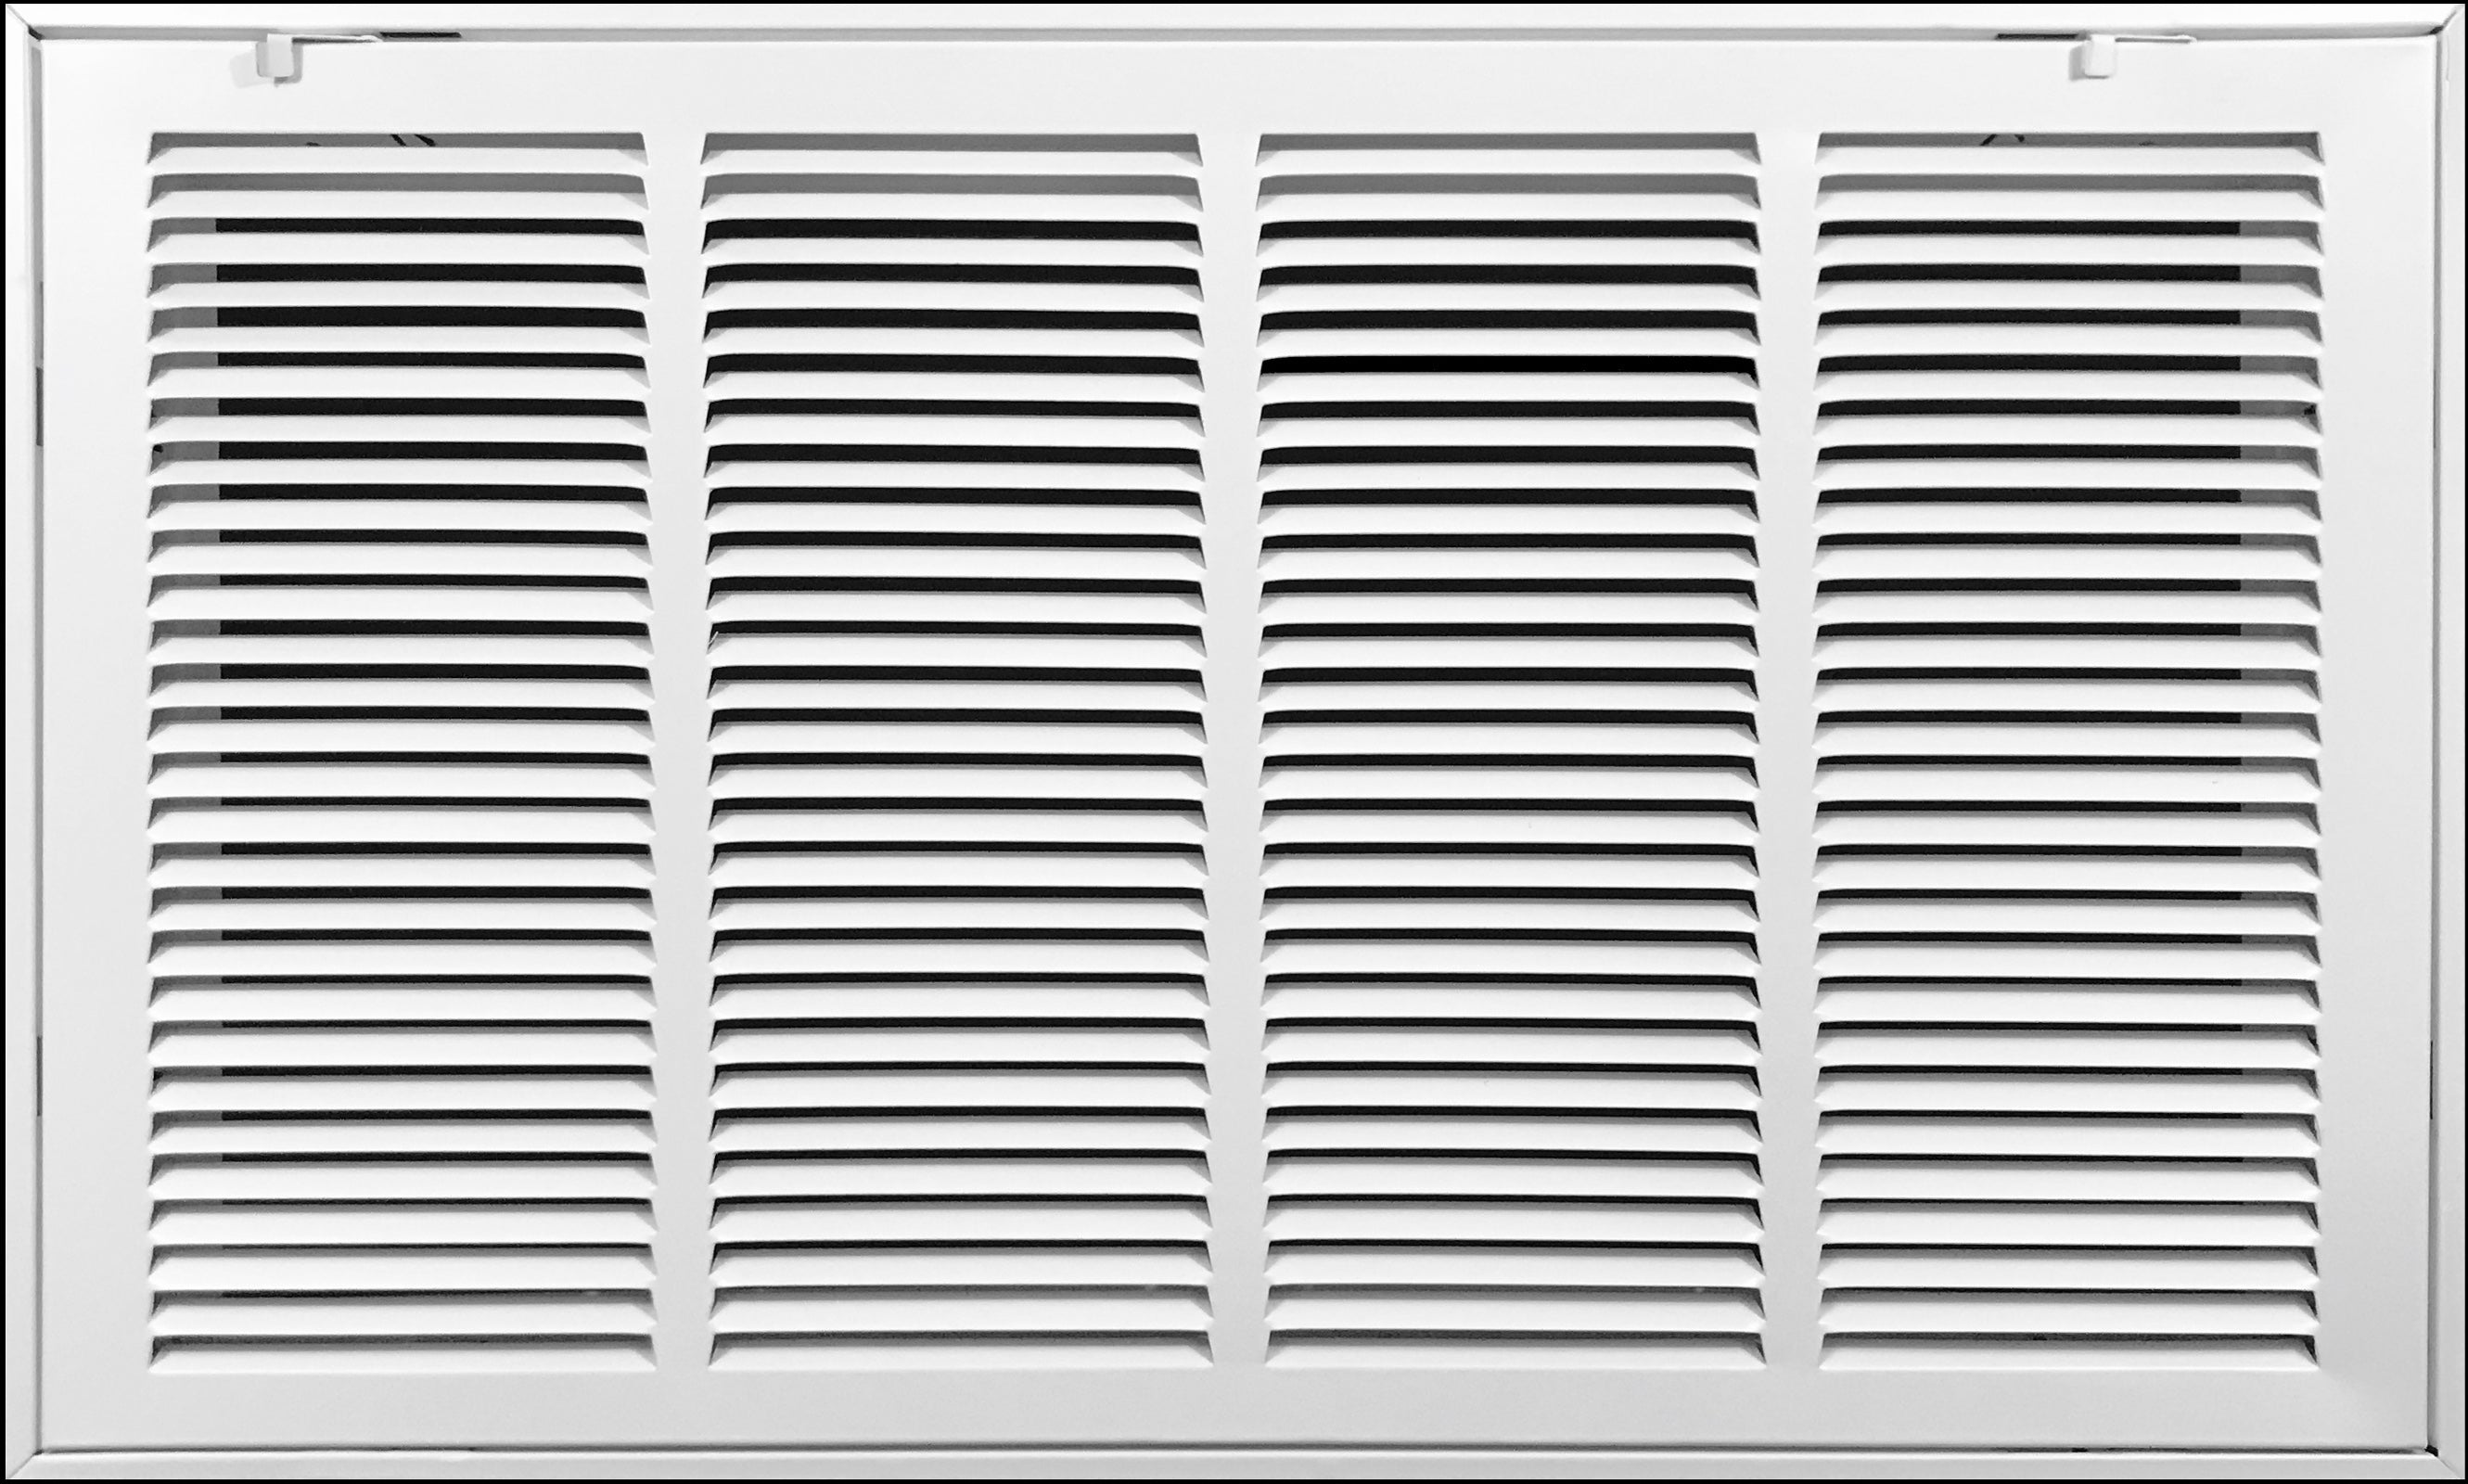 airgrilles 24" x 12" duct opening   hd steel return air filter grille for sidewall and ceiling 7hnd-rfg1-wh-24x12 038775638265 - 1